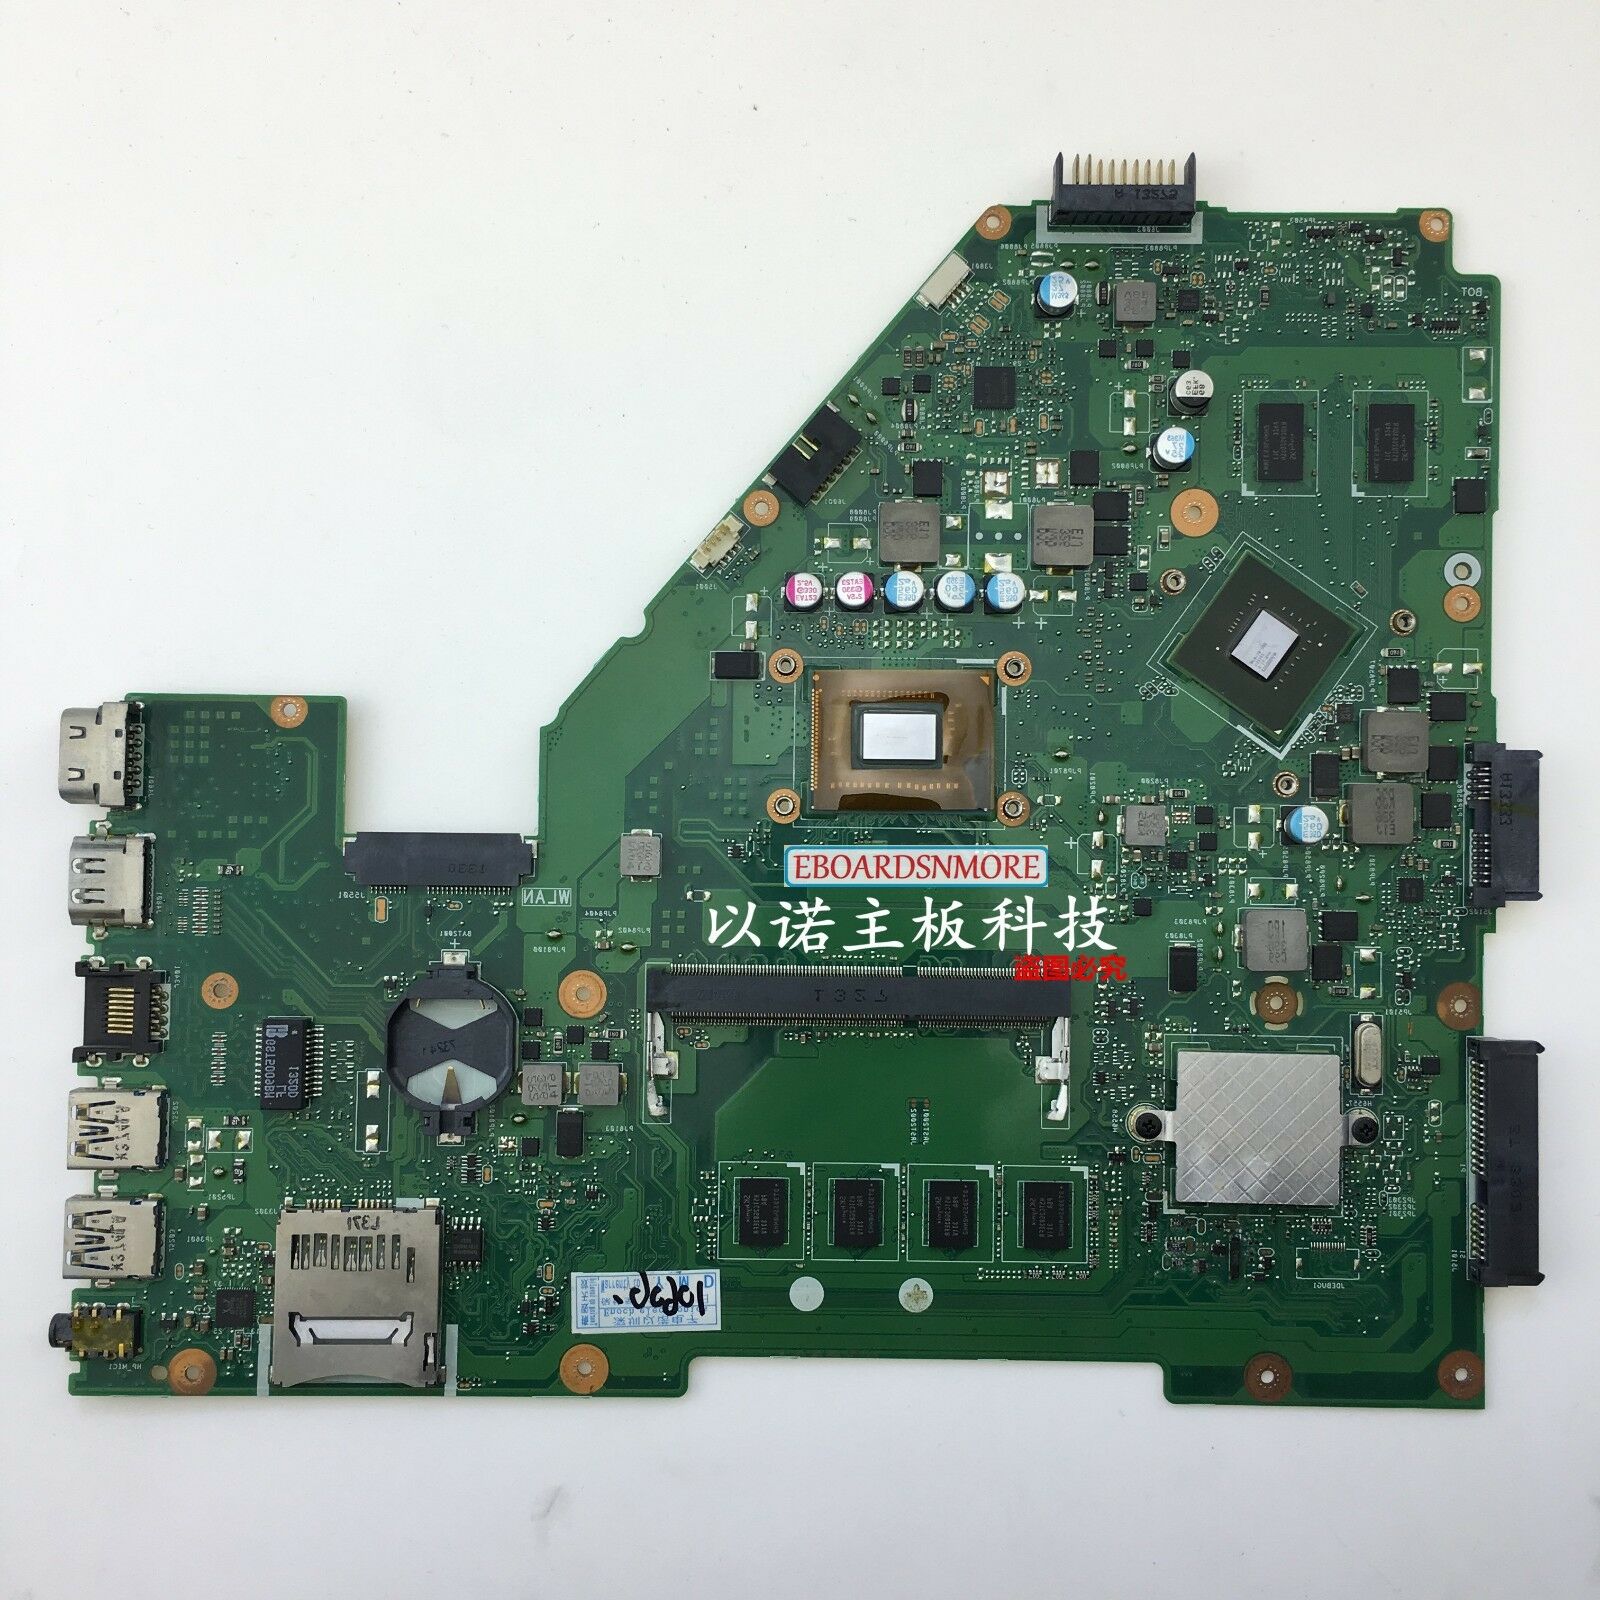 658340-001 Motherboard for HP Probook 4530S 4730S Laptop, Intel HD Graphics Compatible CPU Brand: Intel BG